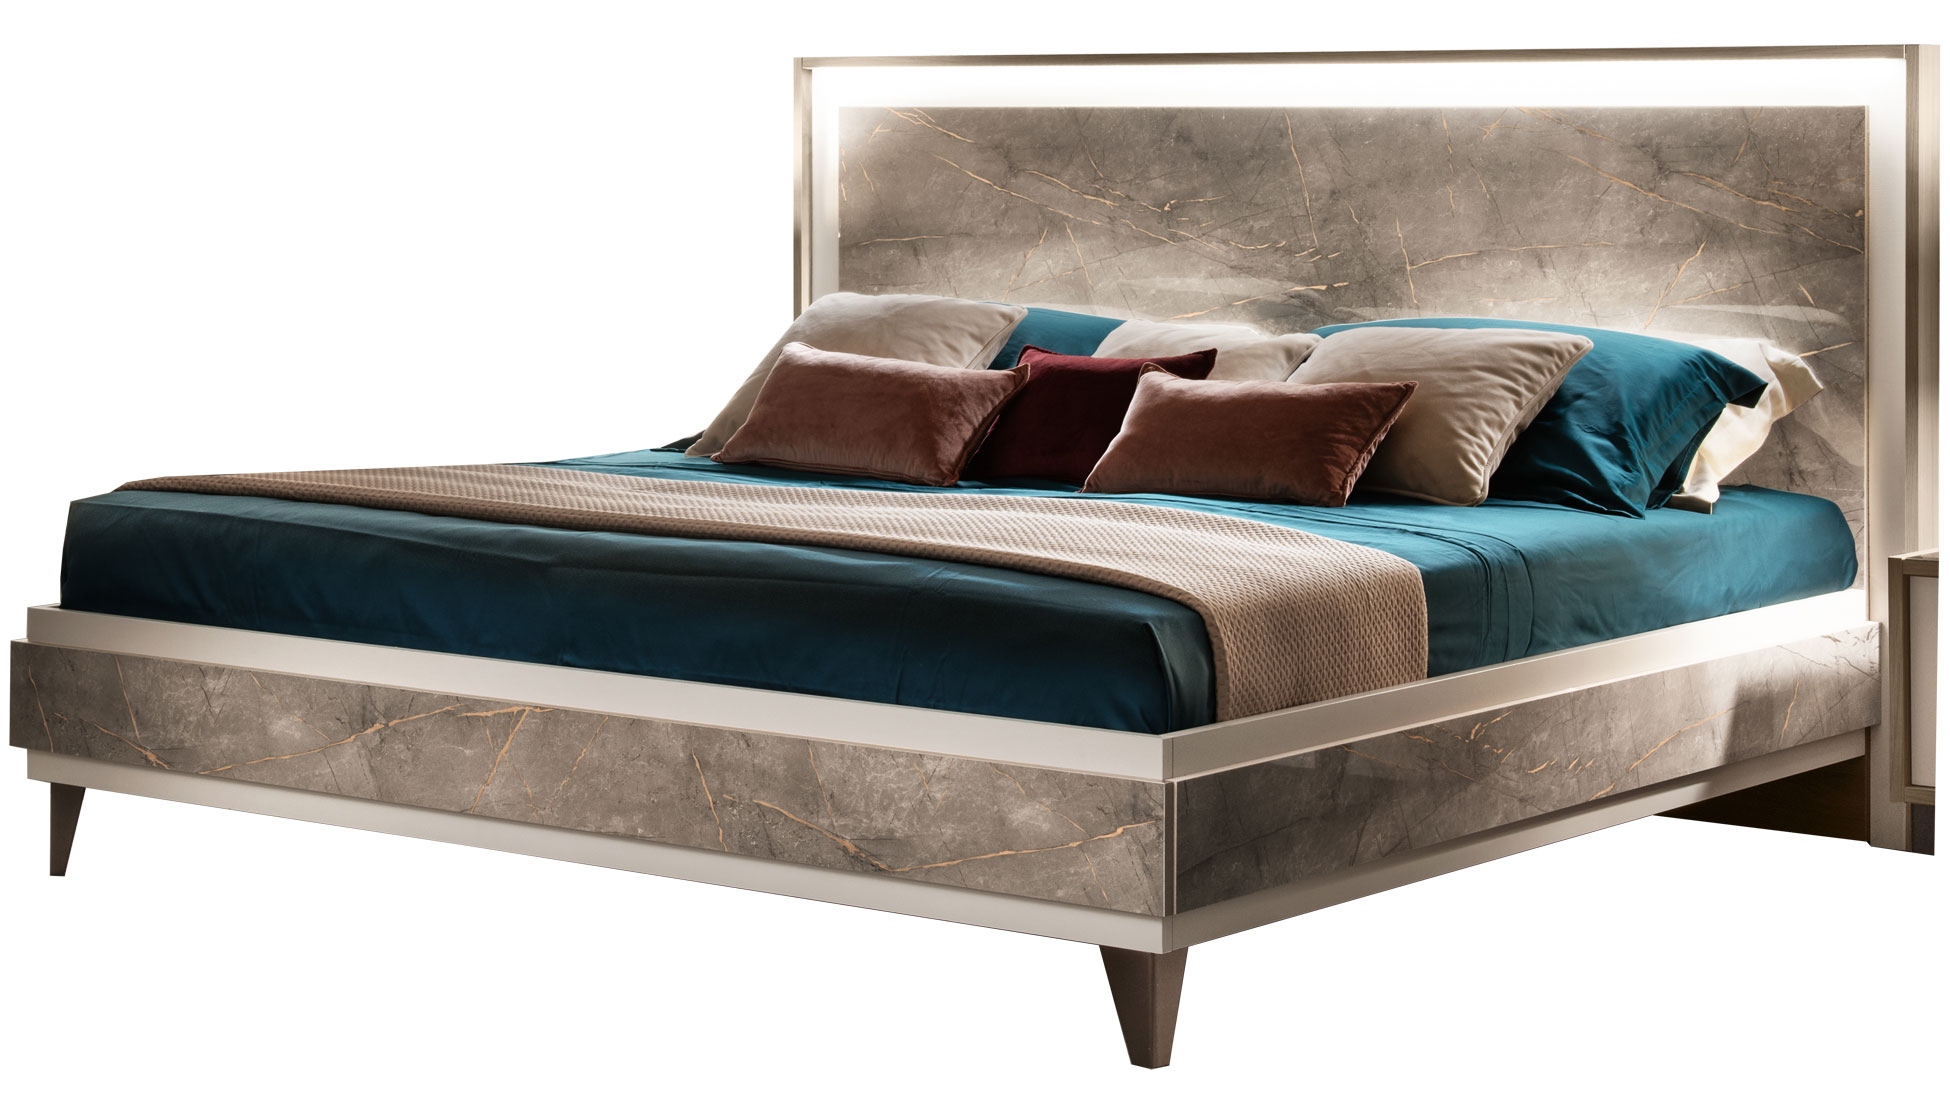 Brands Arredoclassic Dining Room, Italy ArredoAmbra Bed by Arredoclassic